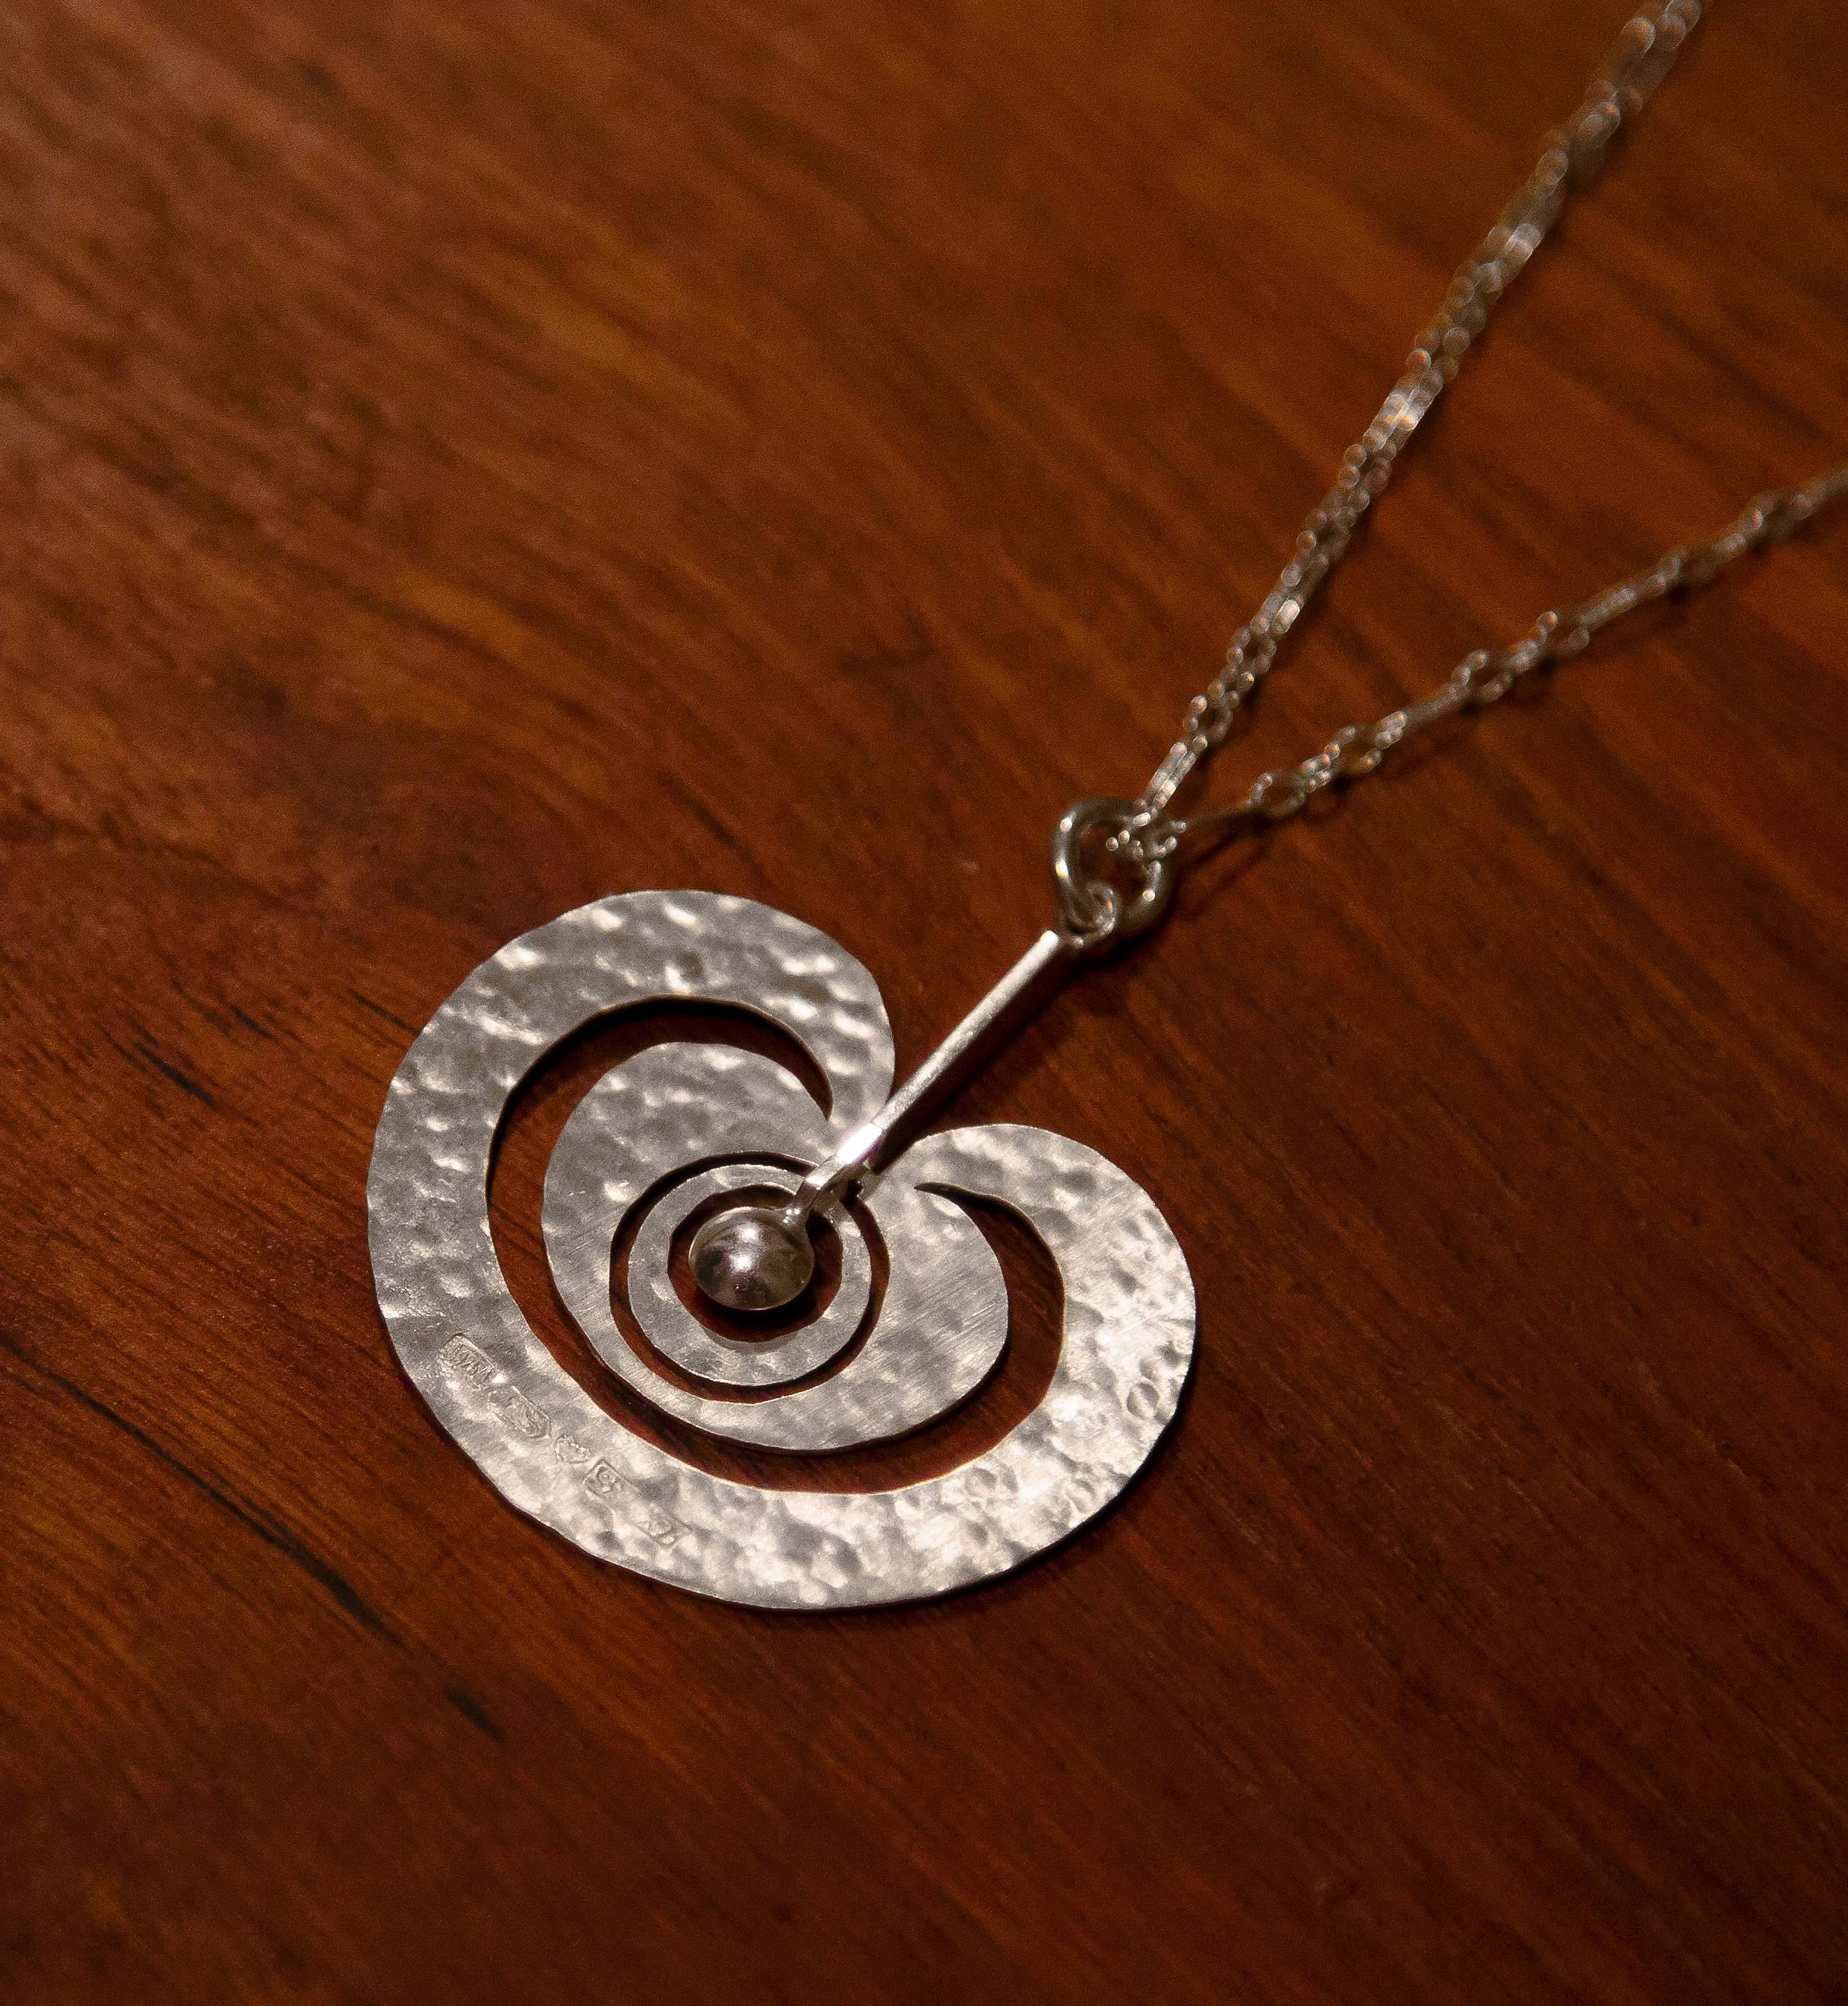 Tapio Wirkkala, sterling silver pendant.

Kultakeskus Oy, Finland, 1975.
Model was originally designed in 1972.

Handmade with hand-hammered sterling silver.
 
Impressed with following hallmarks:
Year mark X7 (1975).
Silver purity mark